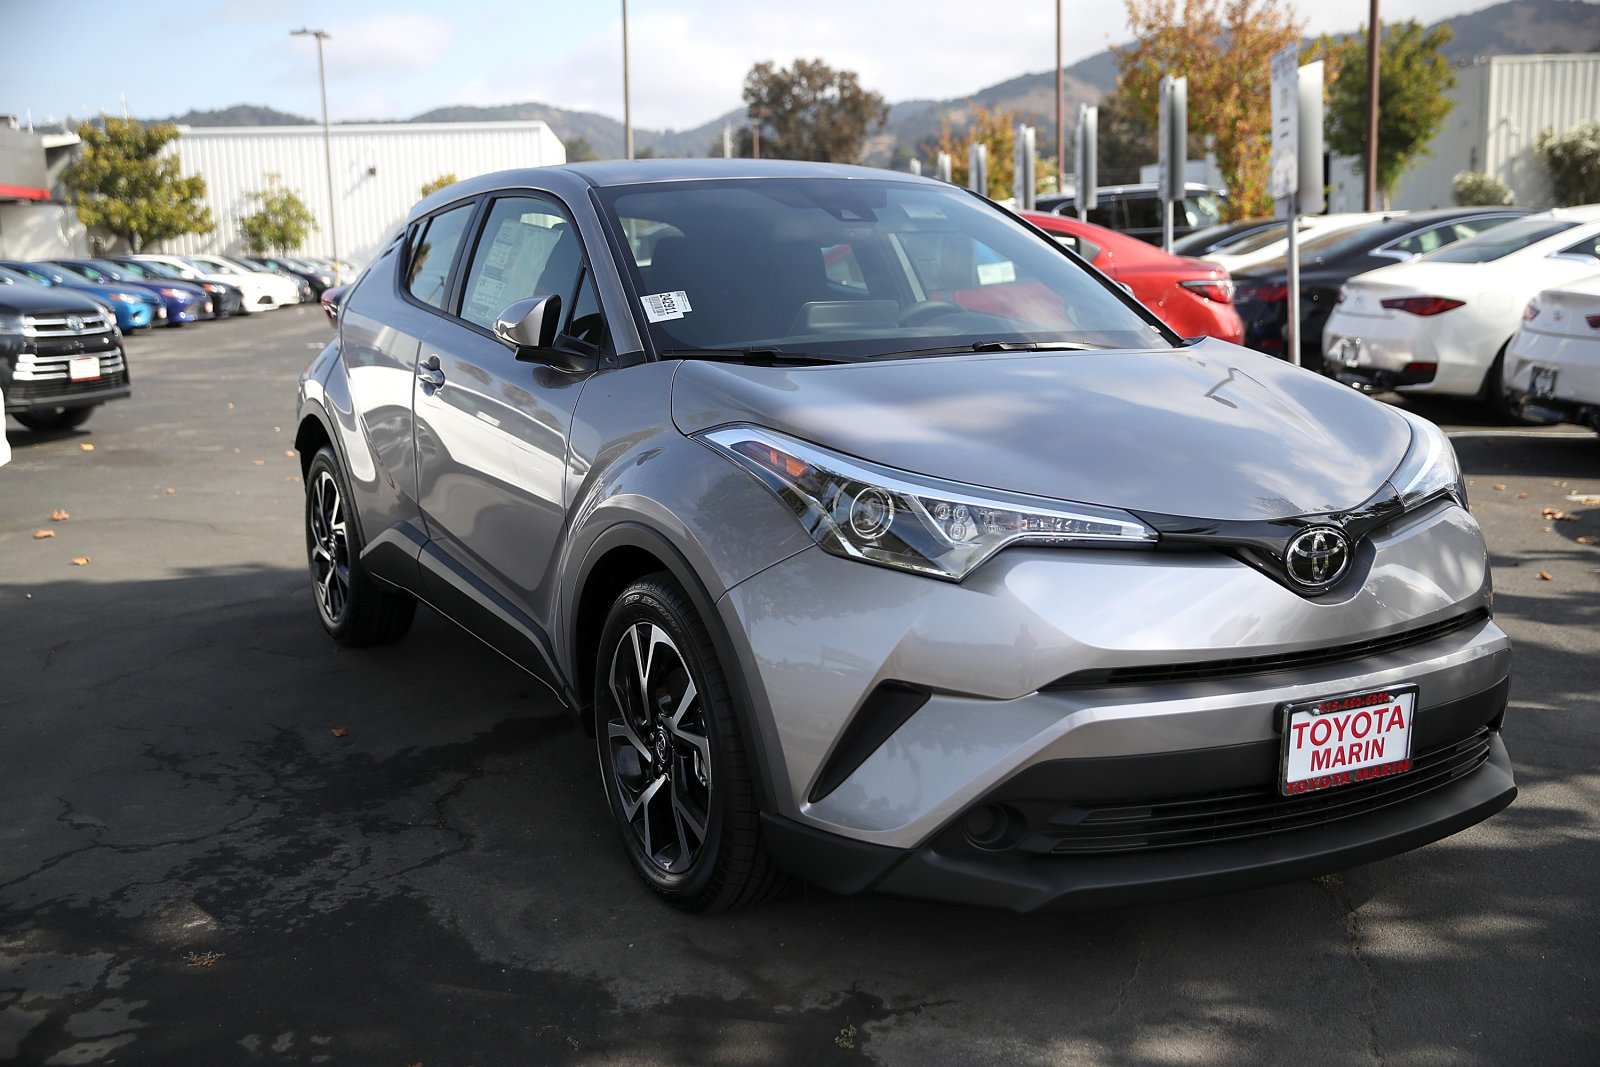 SAN RAFAEL, CA - SEPTEMBER 05:  A brand new non-hybrid version of the Toyota C-HR is displayed on a sales lot at Toyota Marin on September 5, 2018 in San Rafael, California.  Toyota annouced plans to recall over one million Prius and C-HR crossover sport-utility vehicles globally to fix an electrical system issue that could cause a fire. The vehicles affected by the recall are certain 2016-2018 Prius cars, Prius Prime plug-in hybrids and hybrid versions of the C-HR. Nearly 200,000 Prius cars in the United States will be affected.  (Photo by Justin Sullivan/Getty Images)